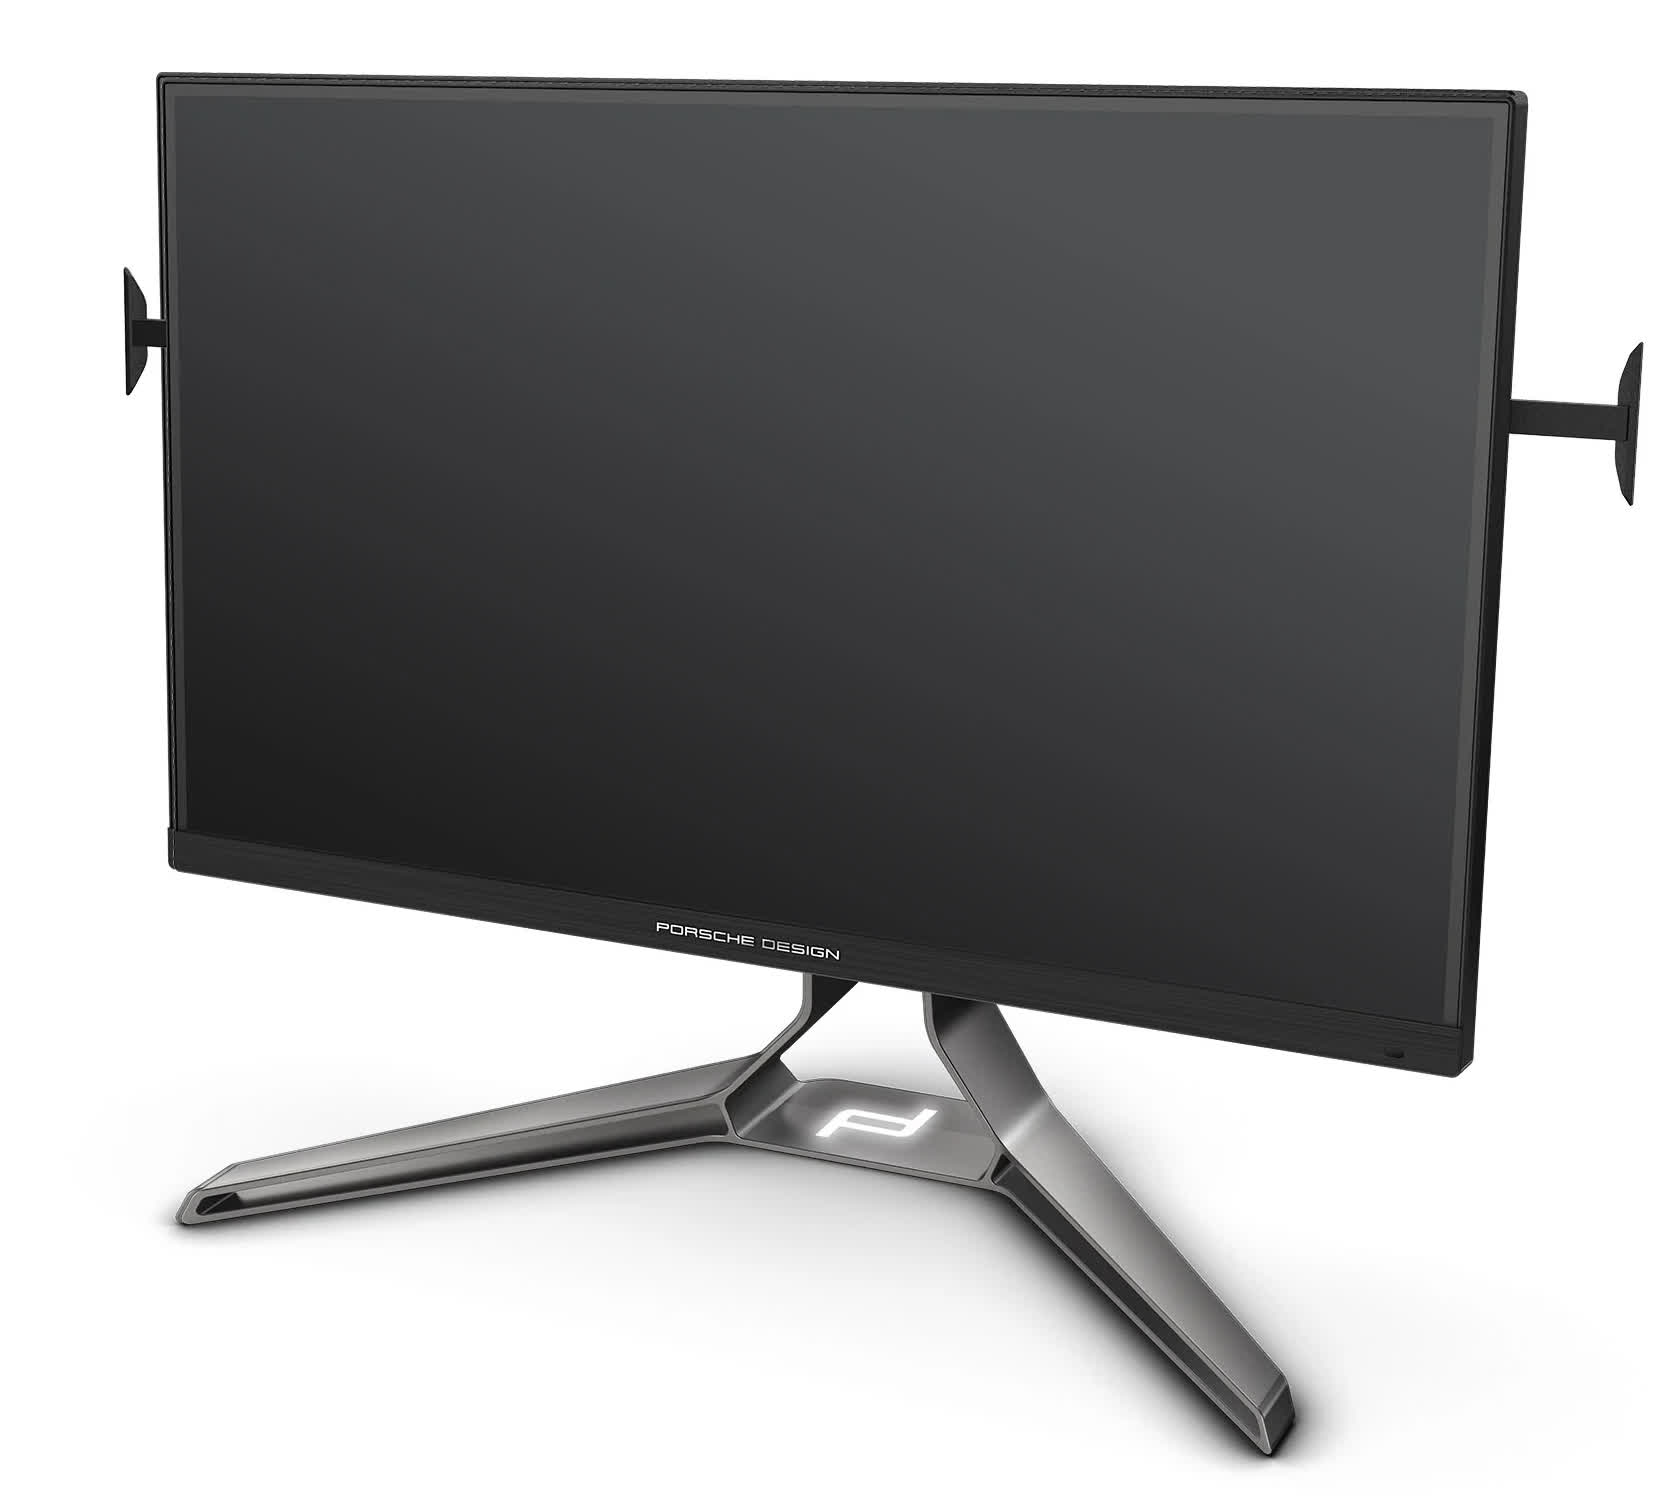 Latest AOC Porsche Design monitor is a 32-inch 144Hz mini LED 4K display, 1600 nits and HDMI 2.1